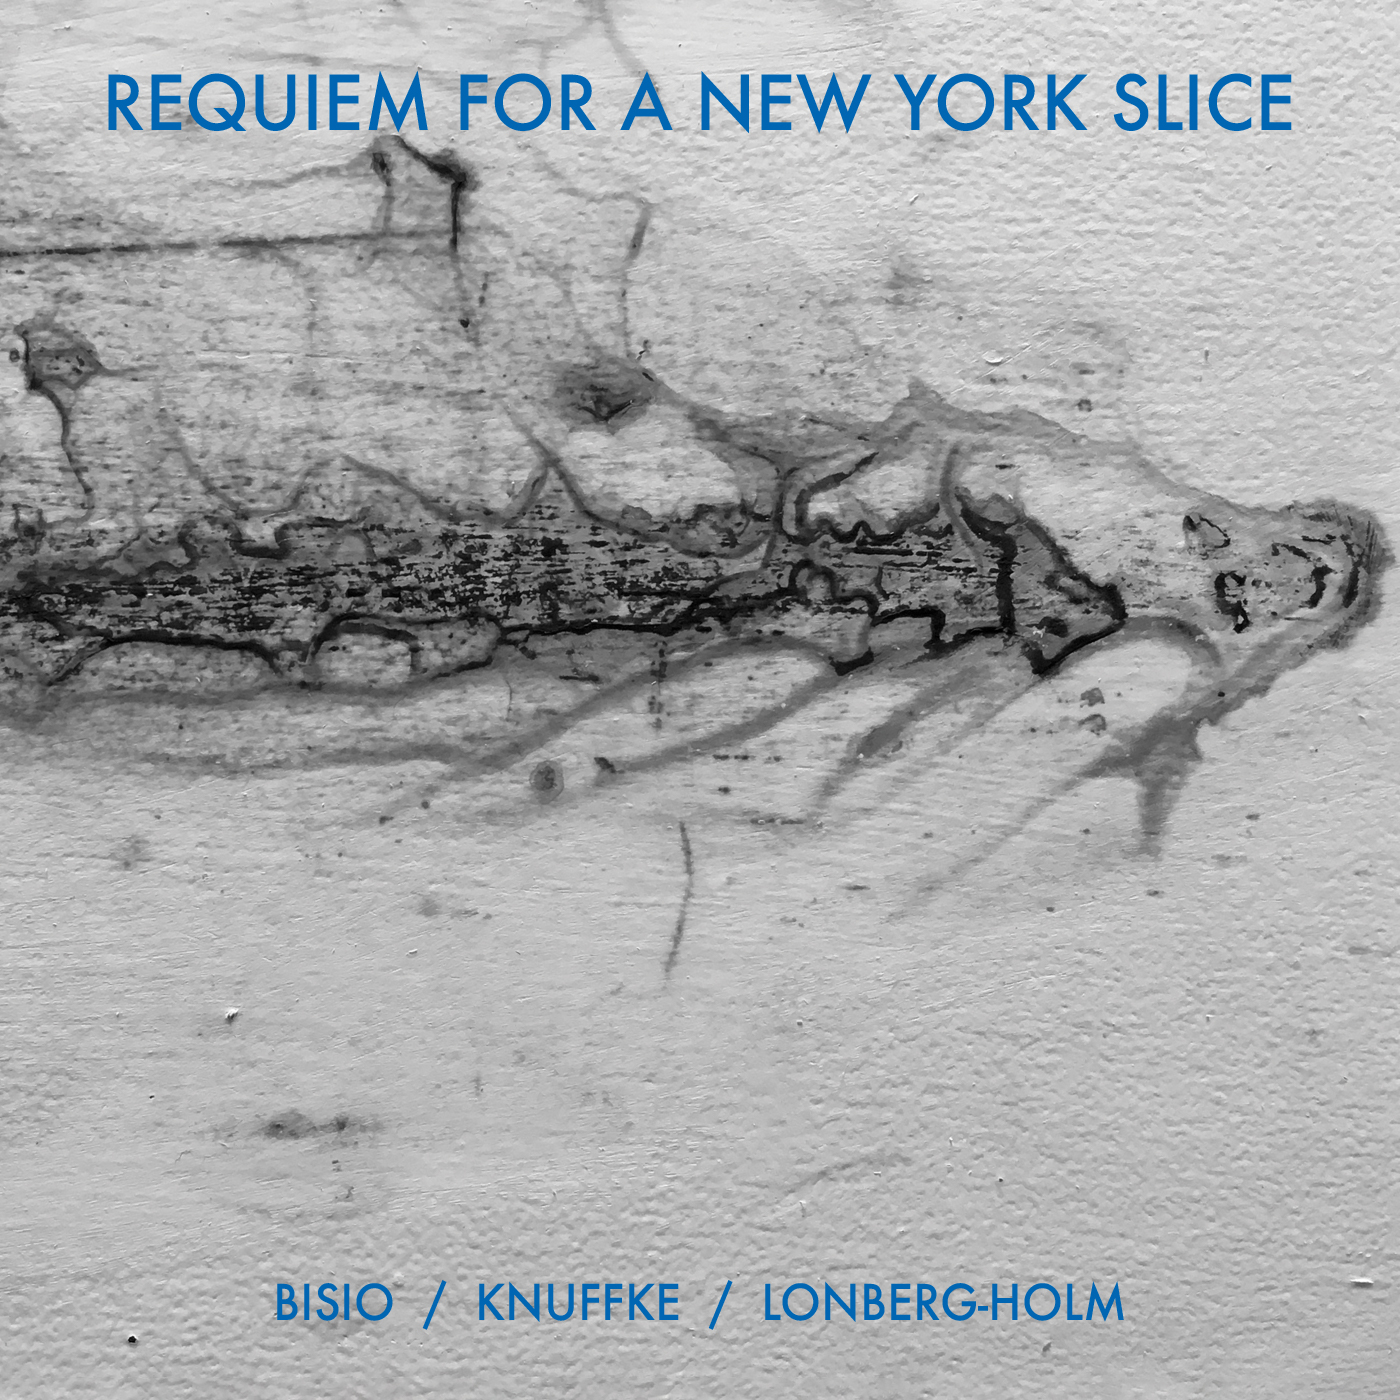 Requiem for a New York Slice by Michael Bisio / Kirk Knuffke / Fred Lonberg-Holm